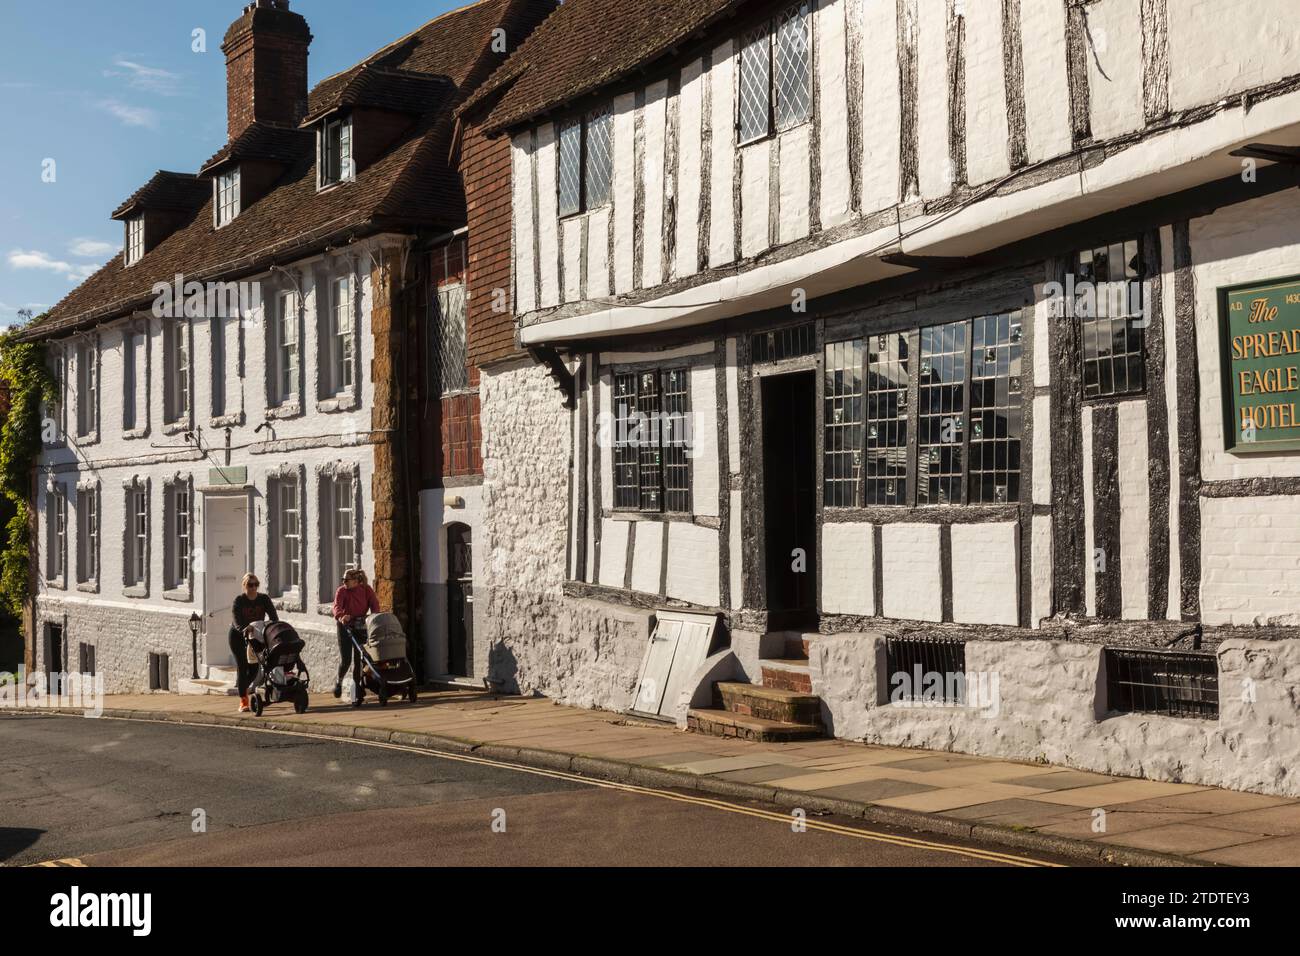 England, West Sussex, Midhurst, The Spread Eagle Hotel Stockfoto